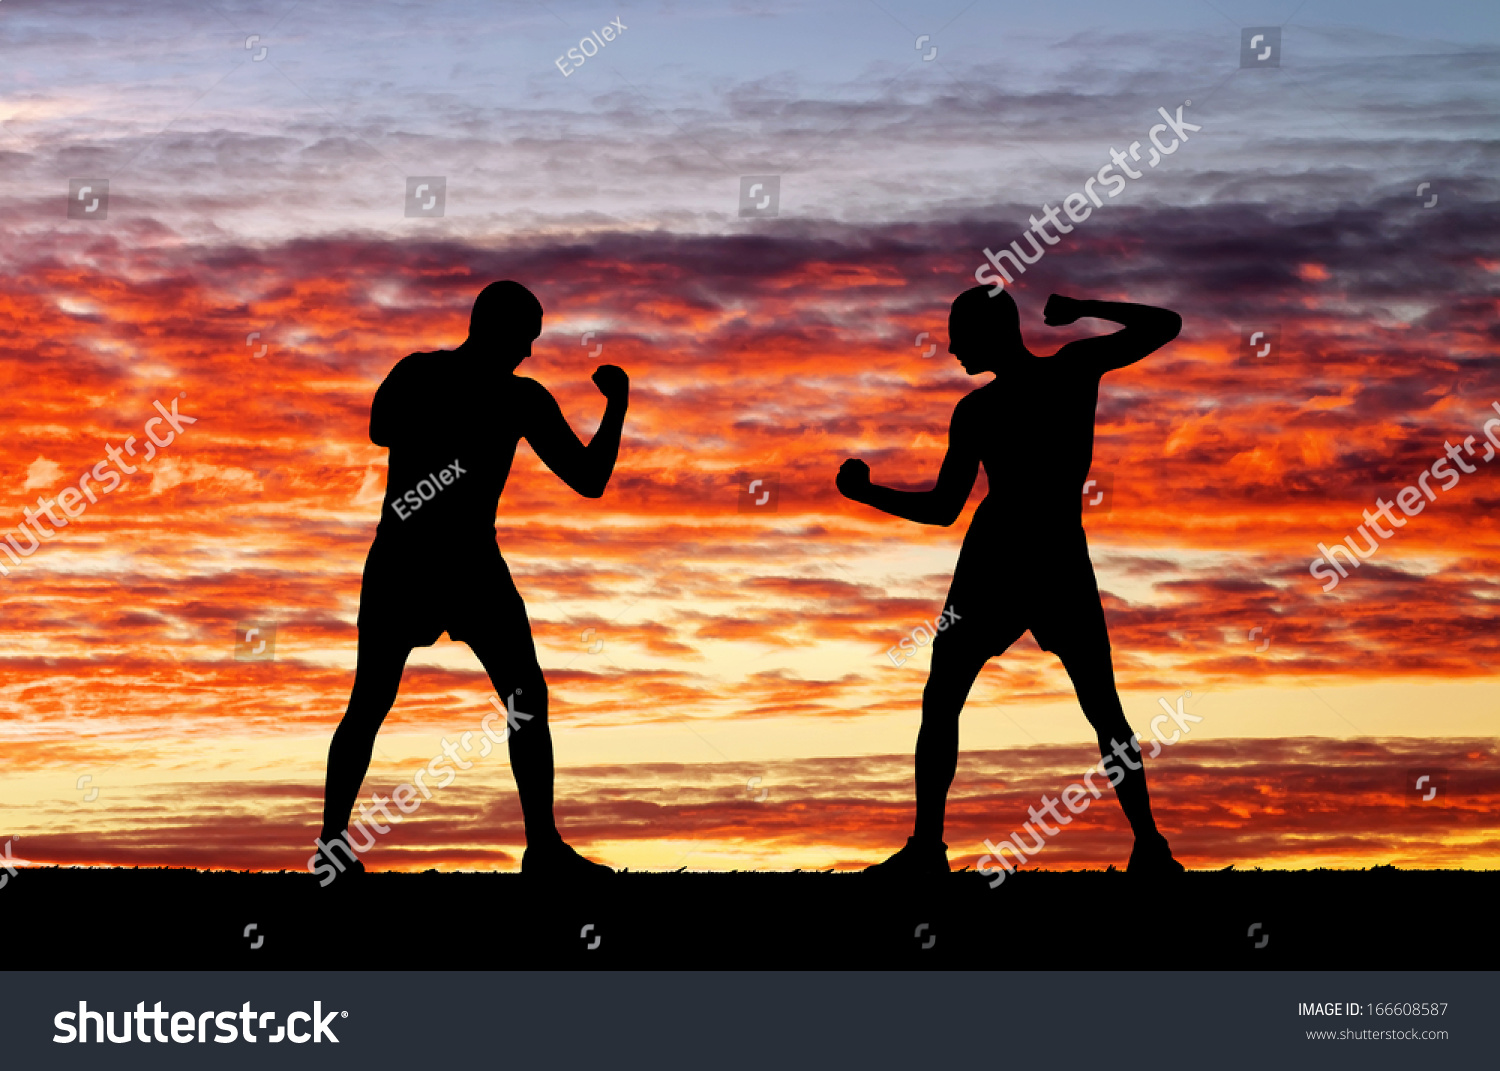 Silhouettes of two fighters on sunset fiery background  #166608587